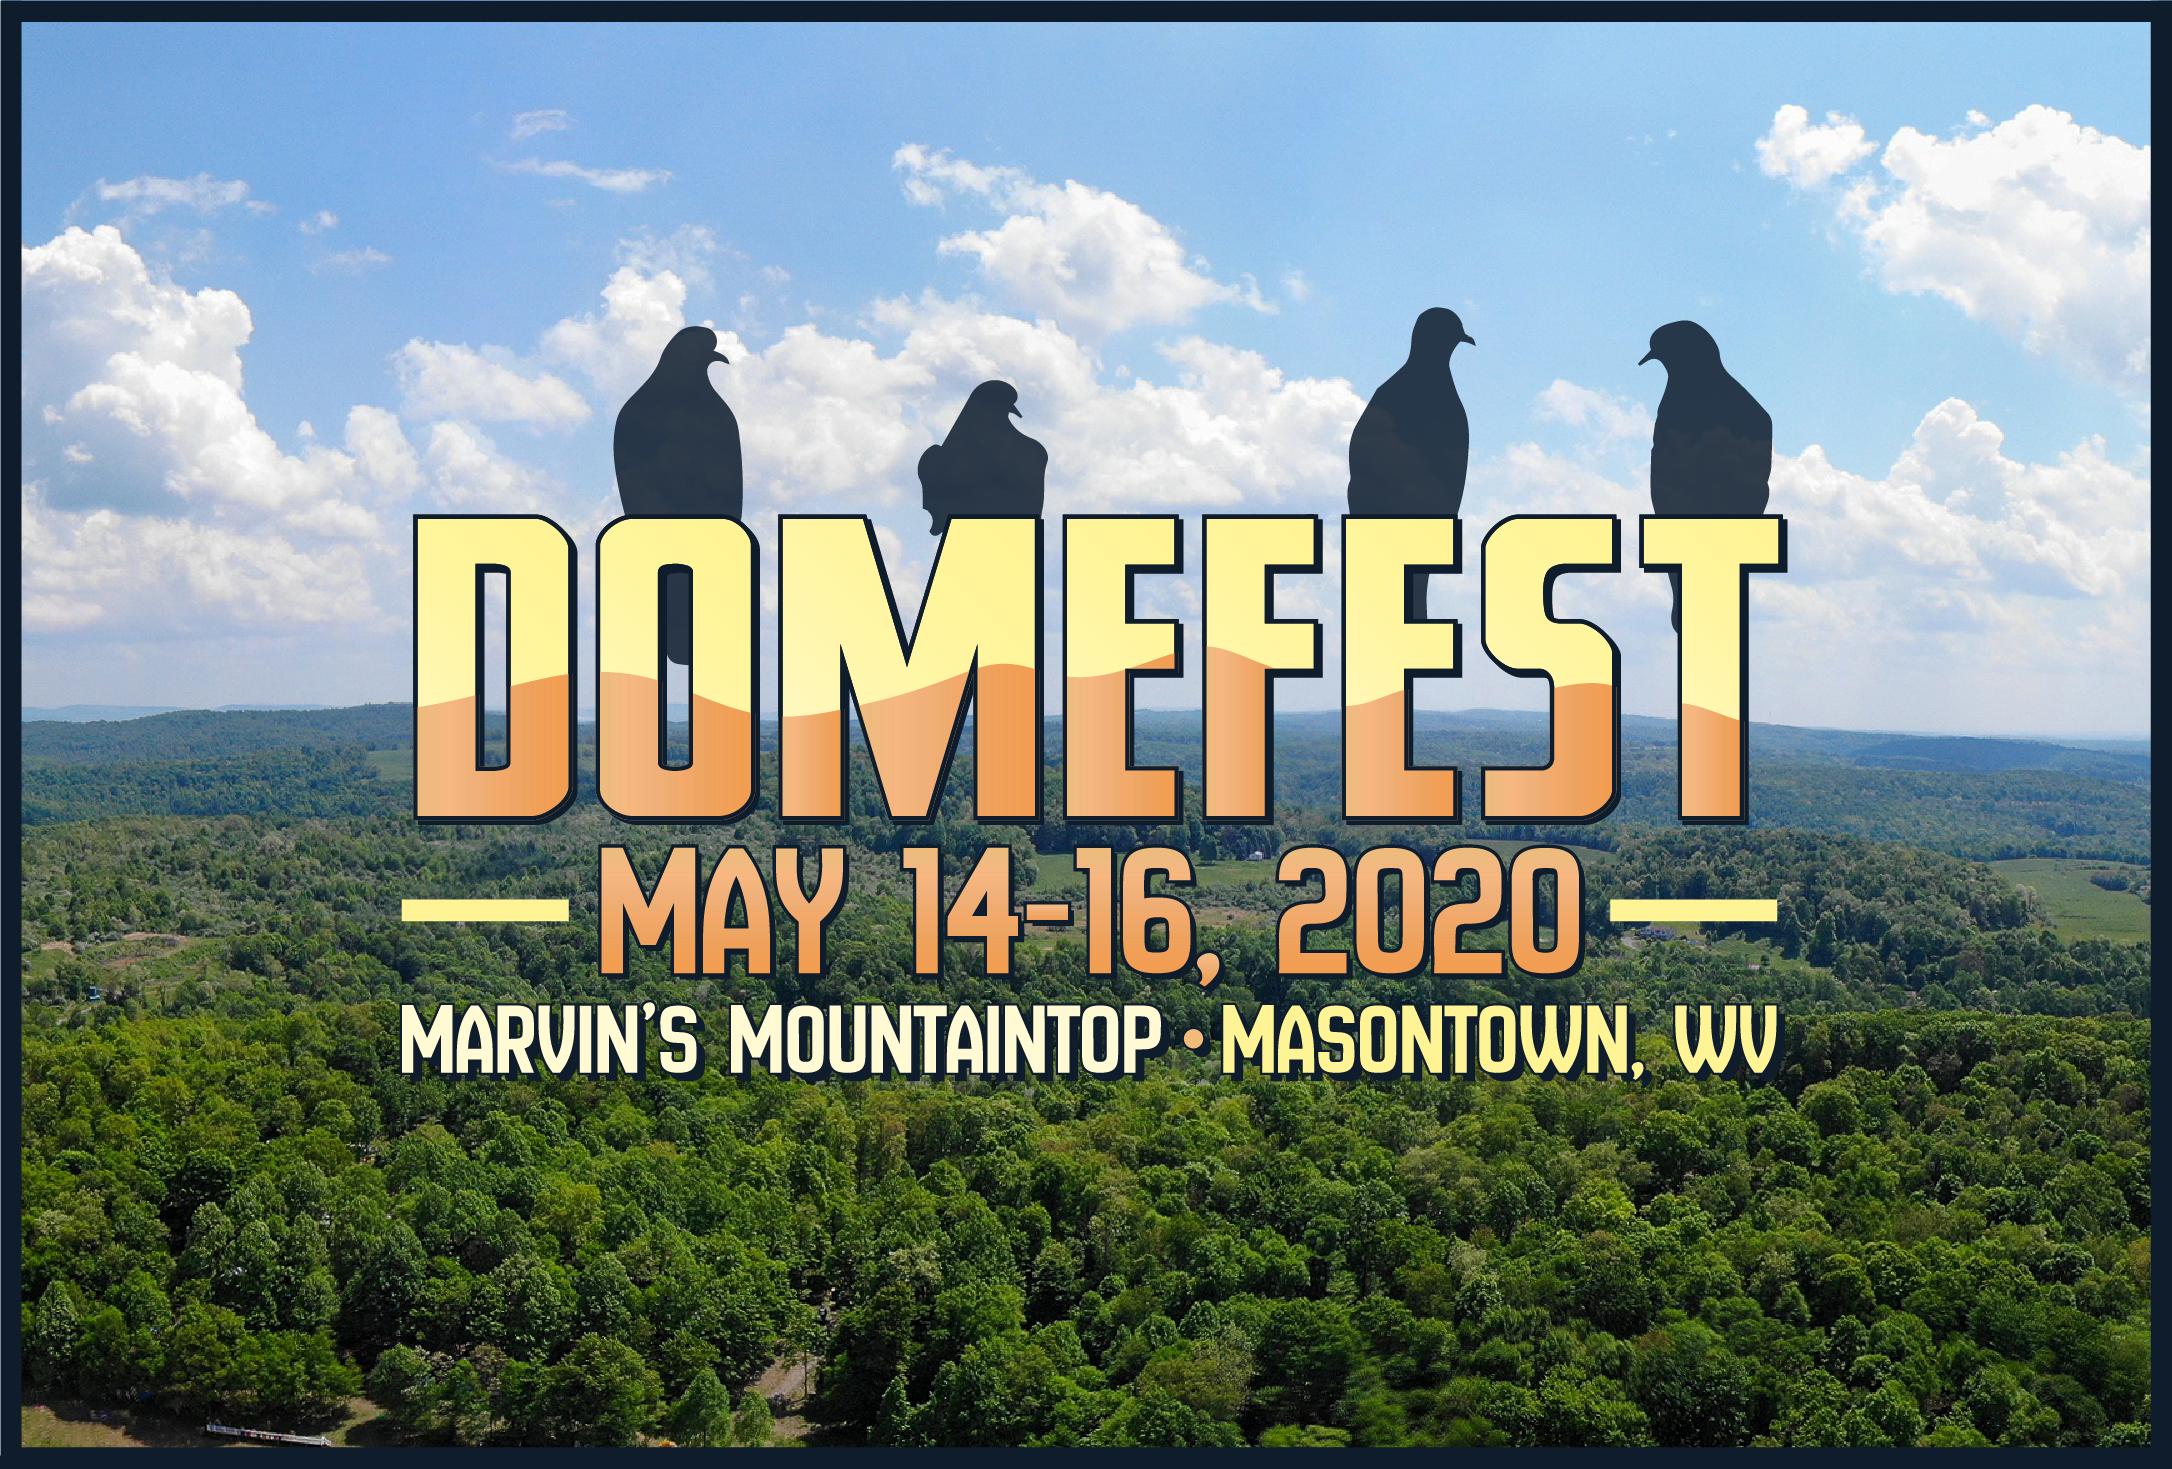 The 11th Annual Domefest Returns to Marvin’s Mountaintop in Masontown, WV on May 14-16, 2020